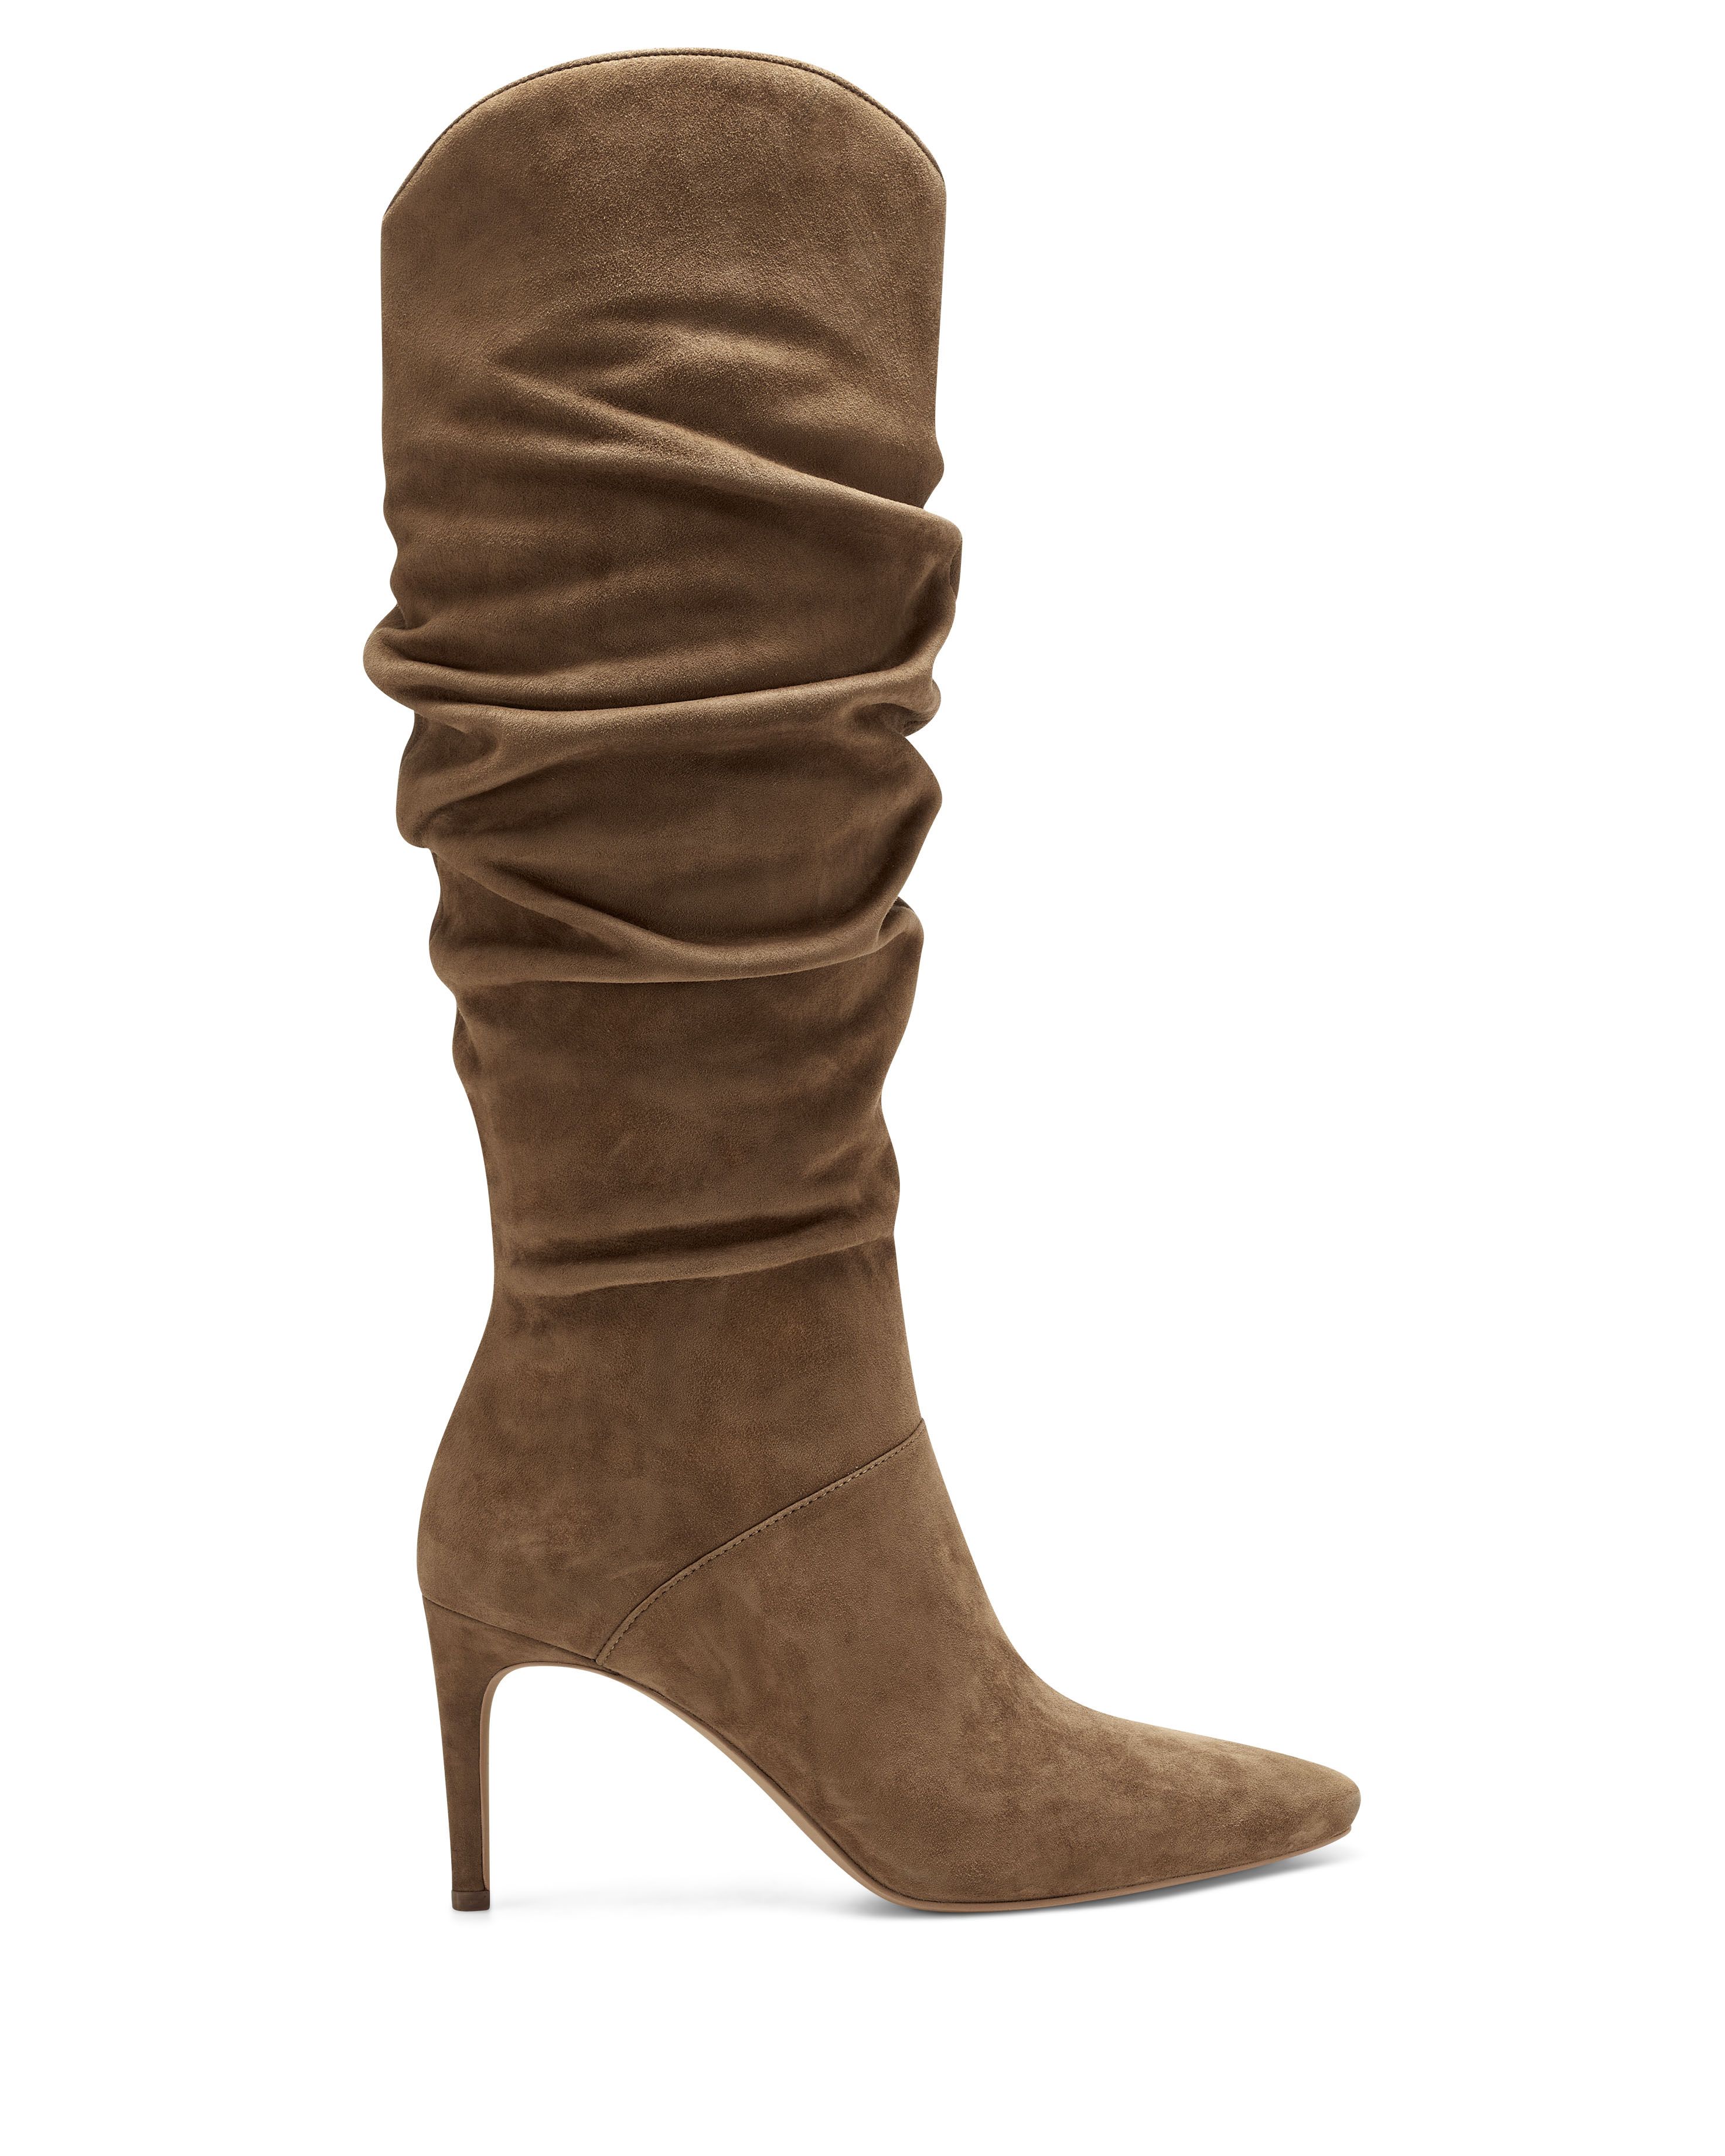 Armonda Slouchy Boot - EXCLUDED FROM PROMOTION | Vince Camuto